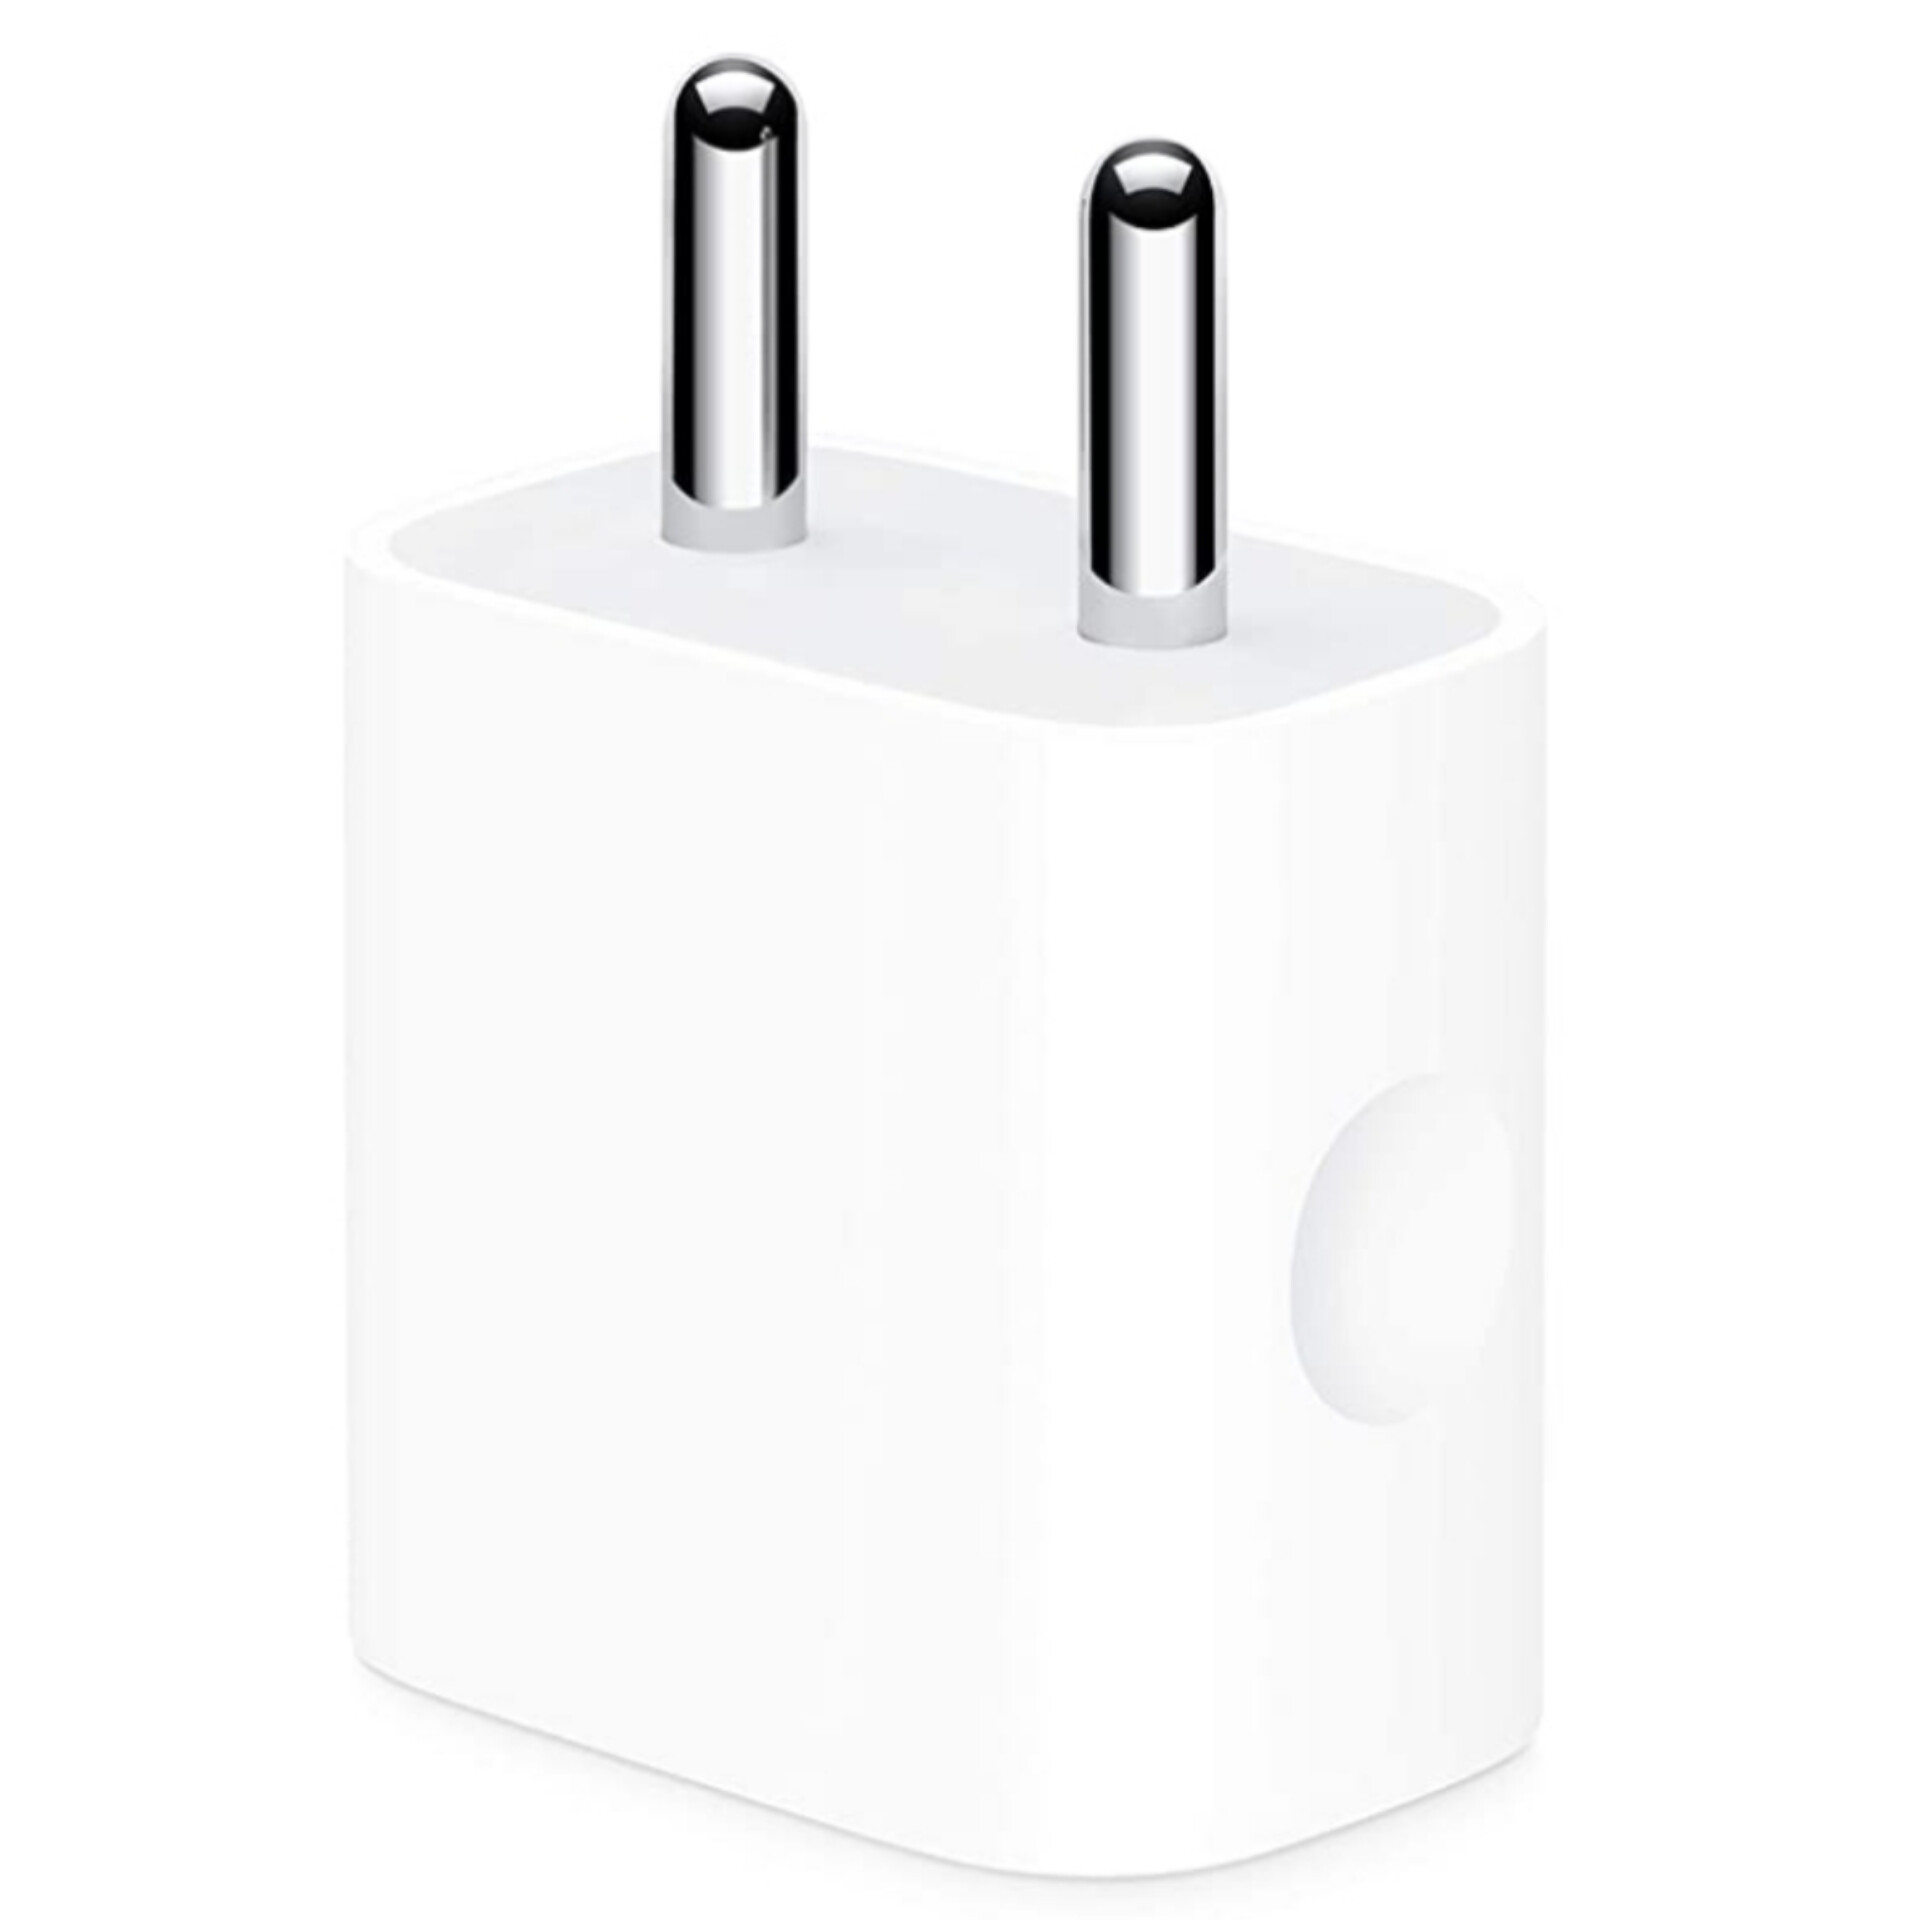 Apple 20W USB-C Power Adapter (for iPhone, iPad & AirPods) – Exchange:  Recycle with Benefits